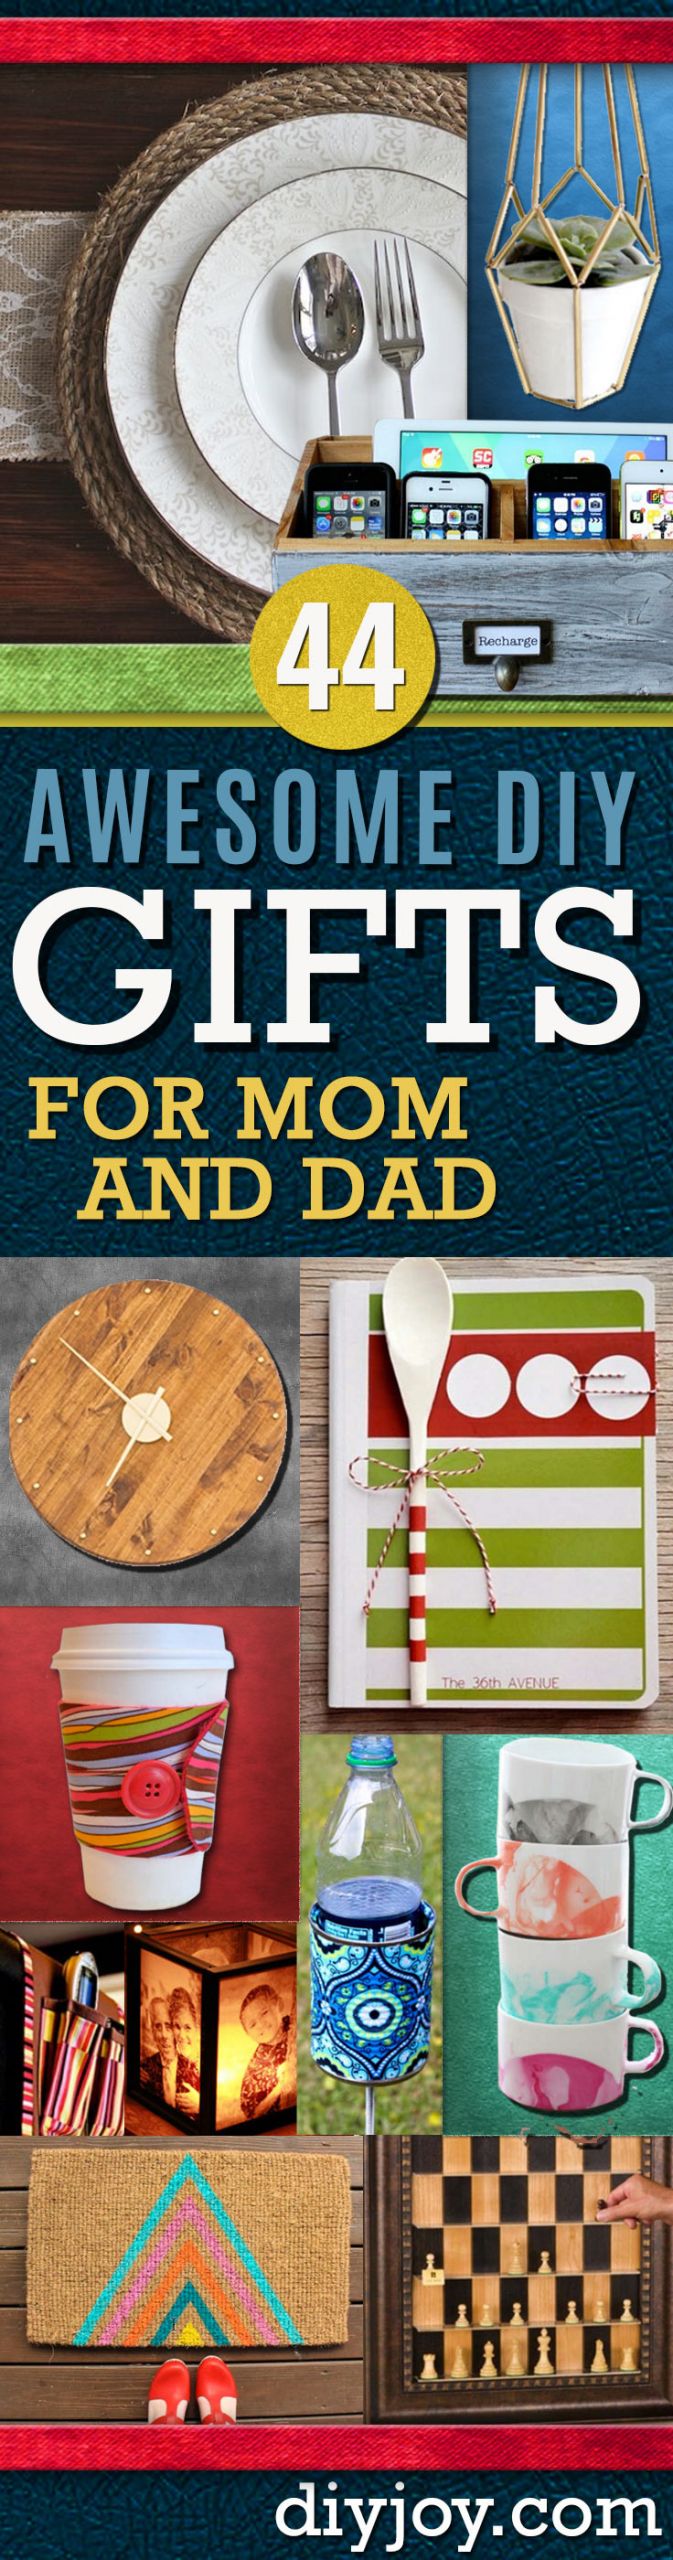 Cute DIY Gifts For Mom
 44 DIY Gift Ideas For Mom and Dad